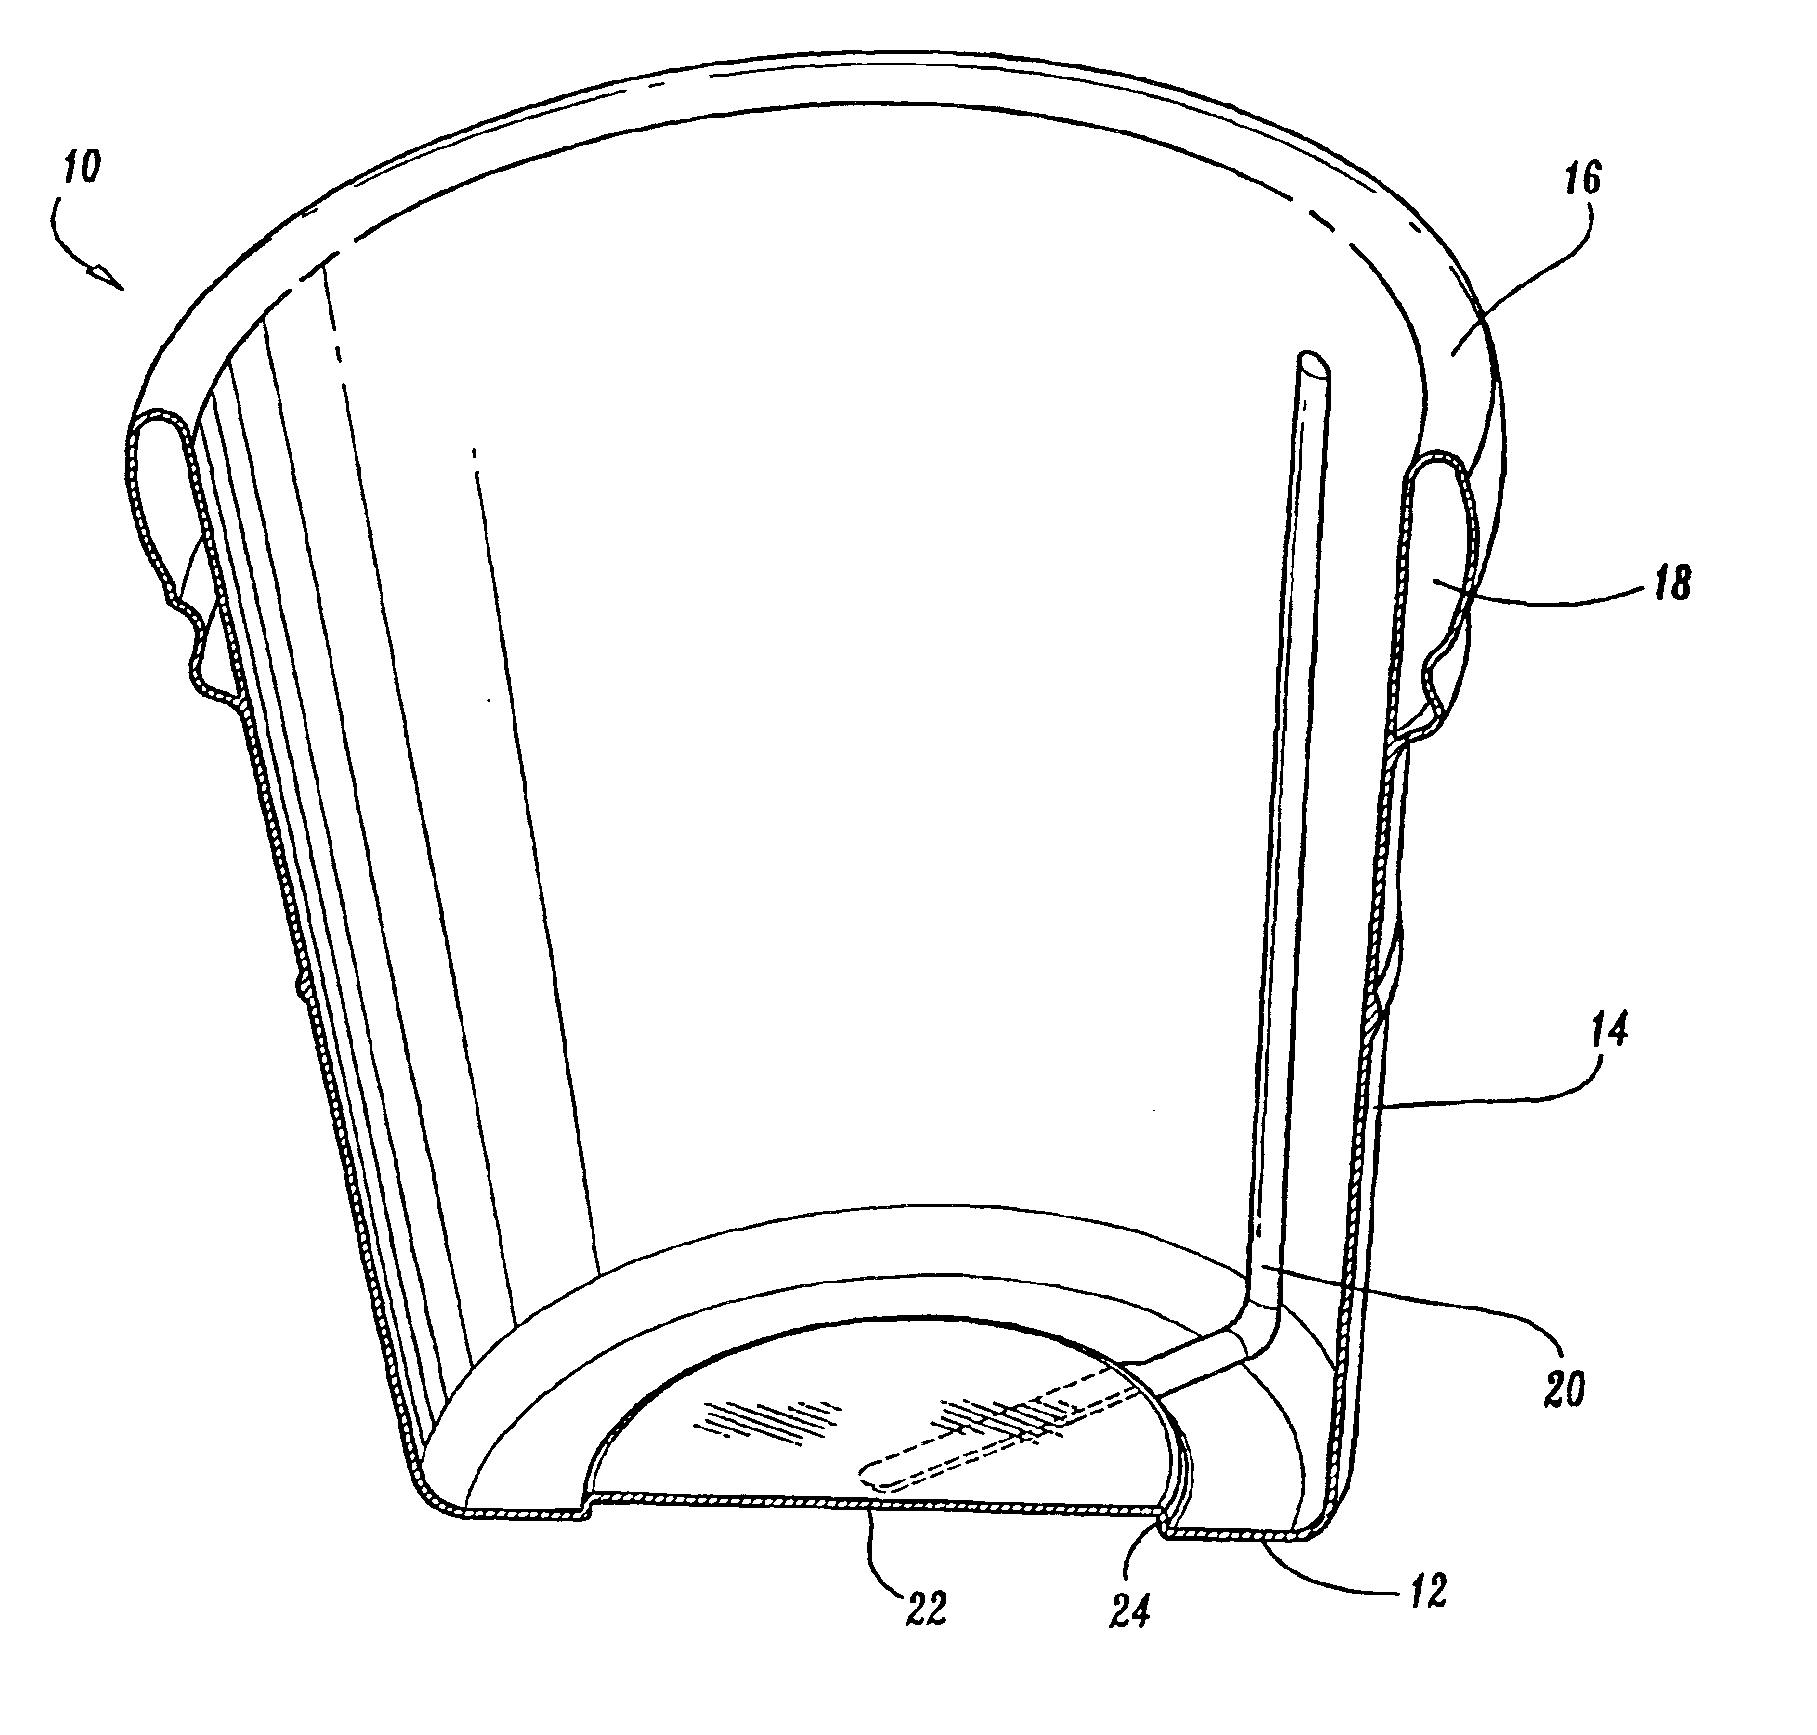 Molded article having hollow rim portion and process for producing articles